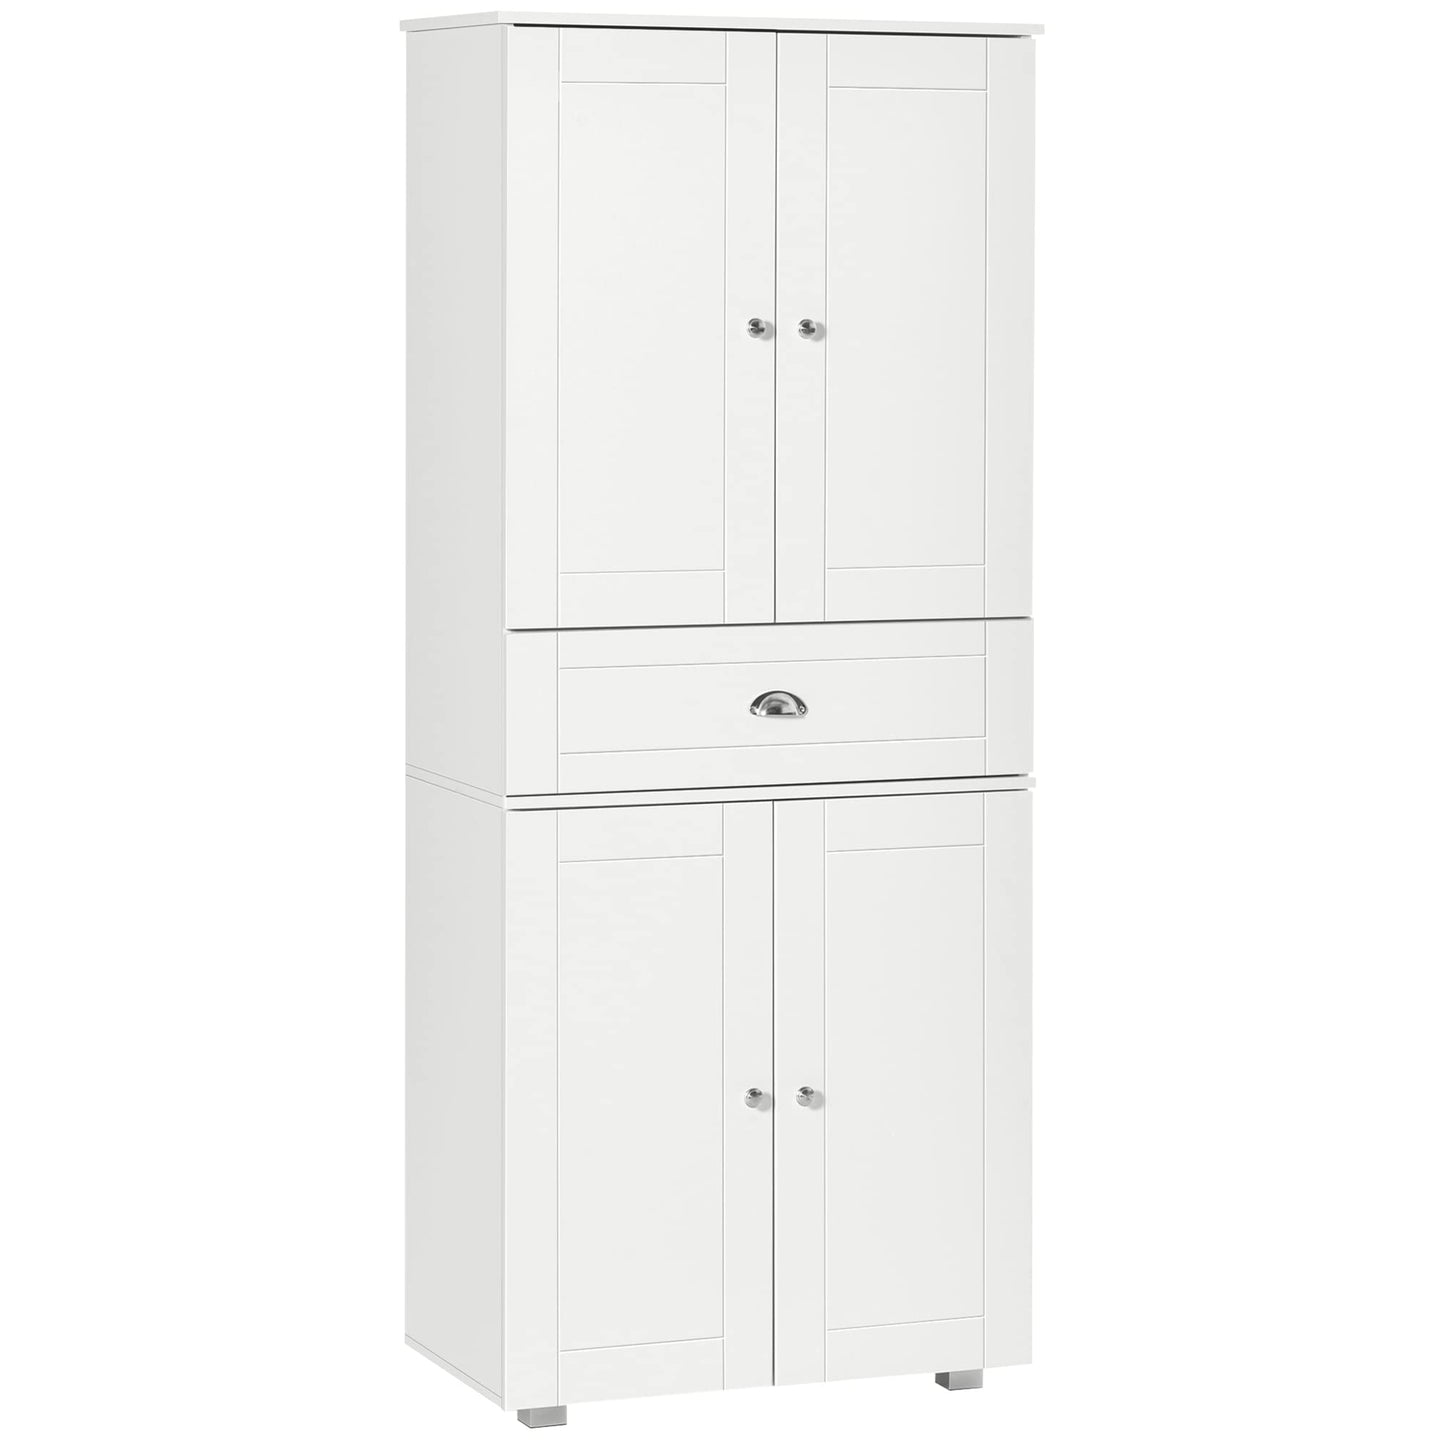 HOMCOM 72" Freestanding Kitchen Pantry Cabinet with 2 Large Double Door Cabinets and 1 Center Drawer, White